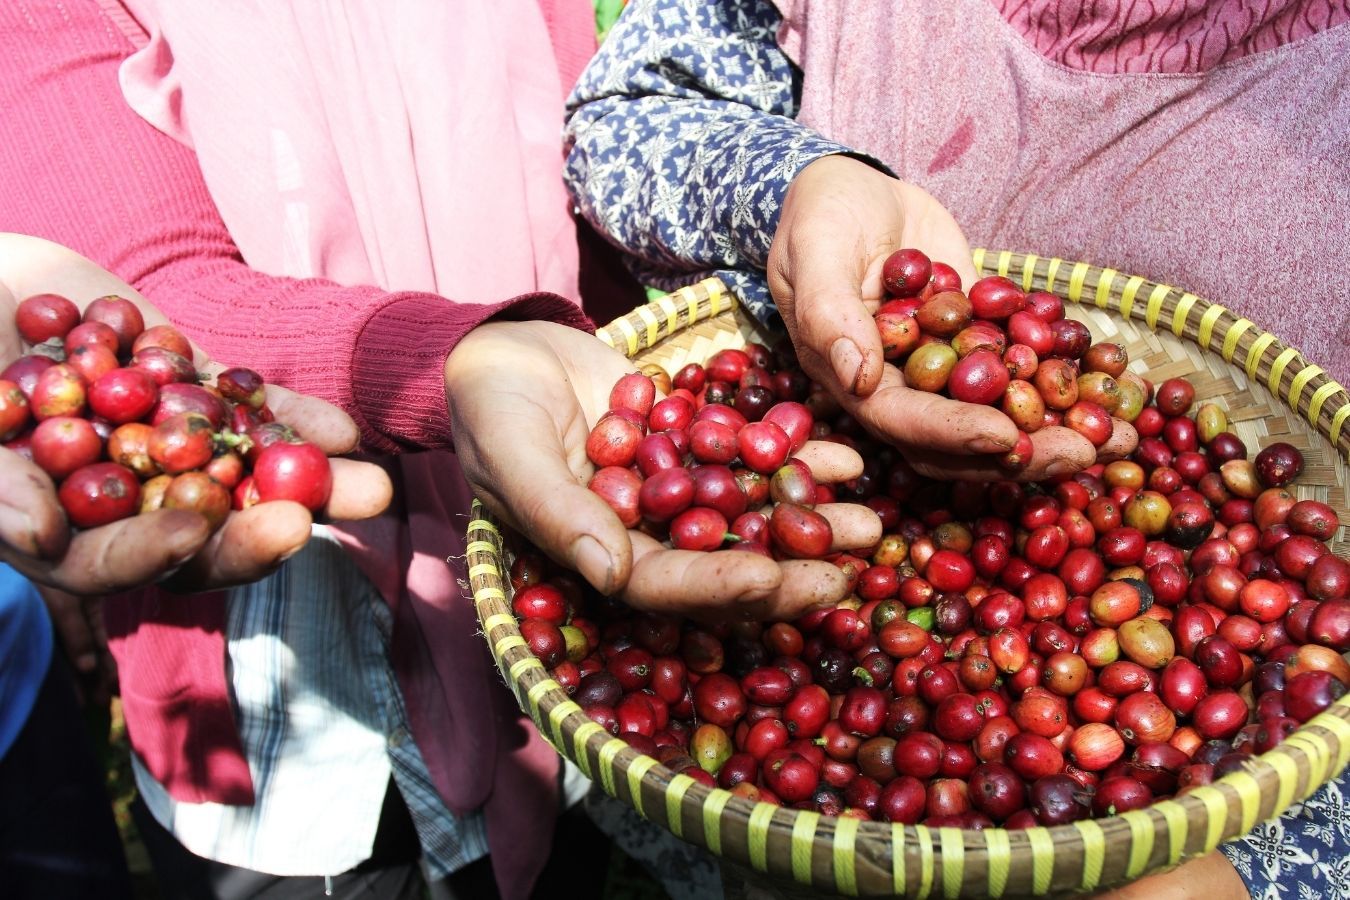 How To Find A Coffee Bean Supplier